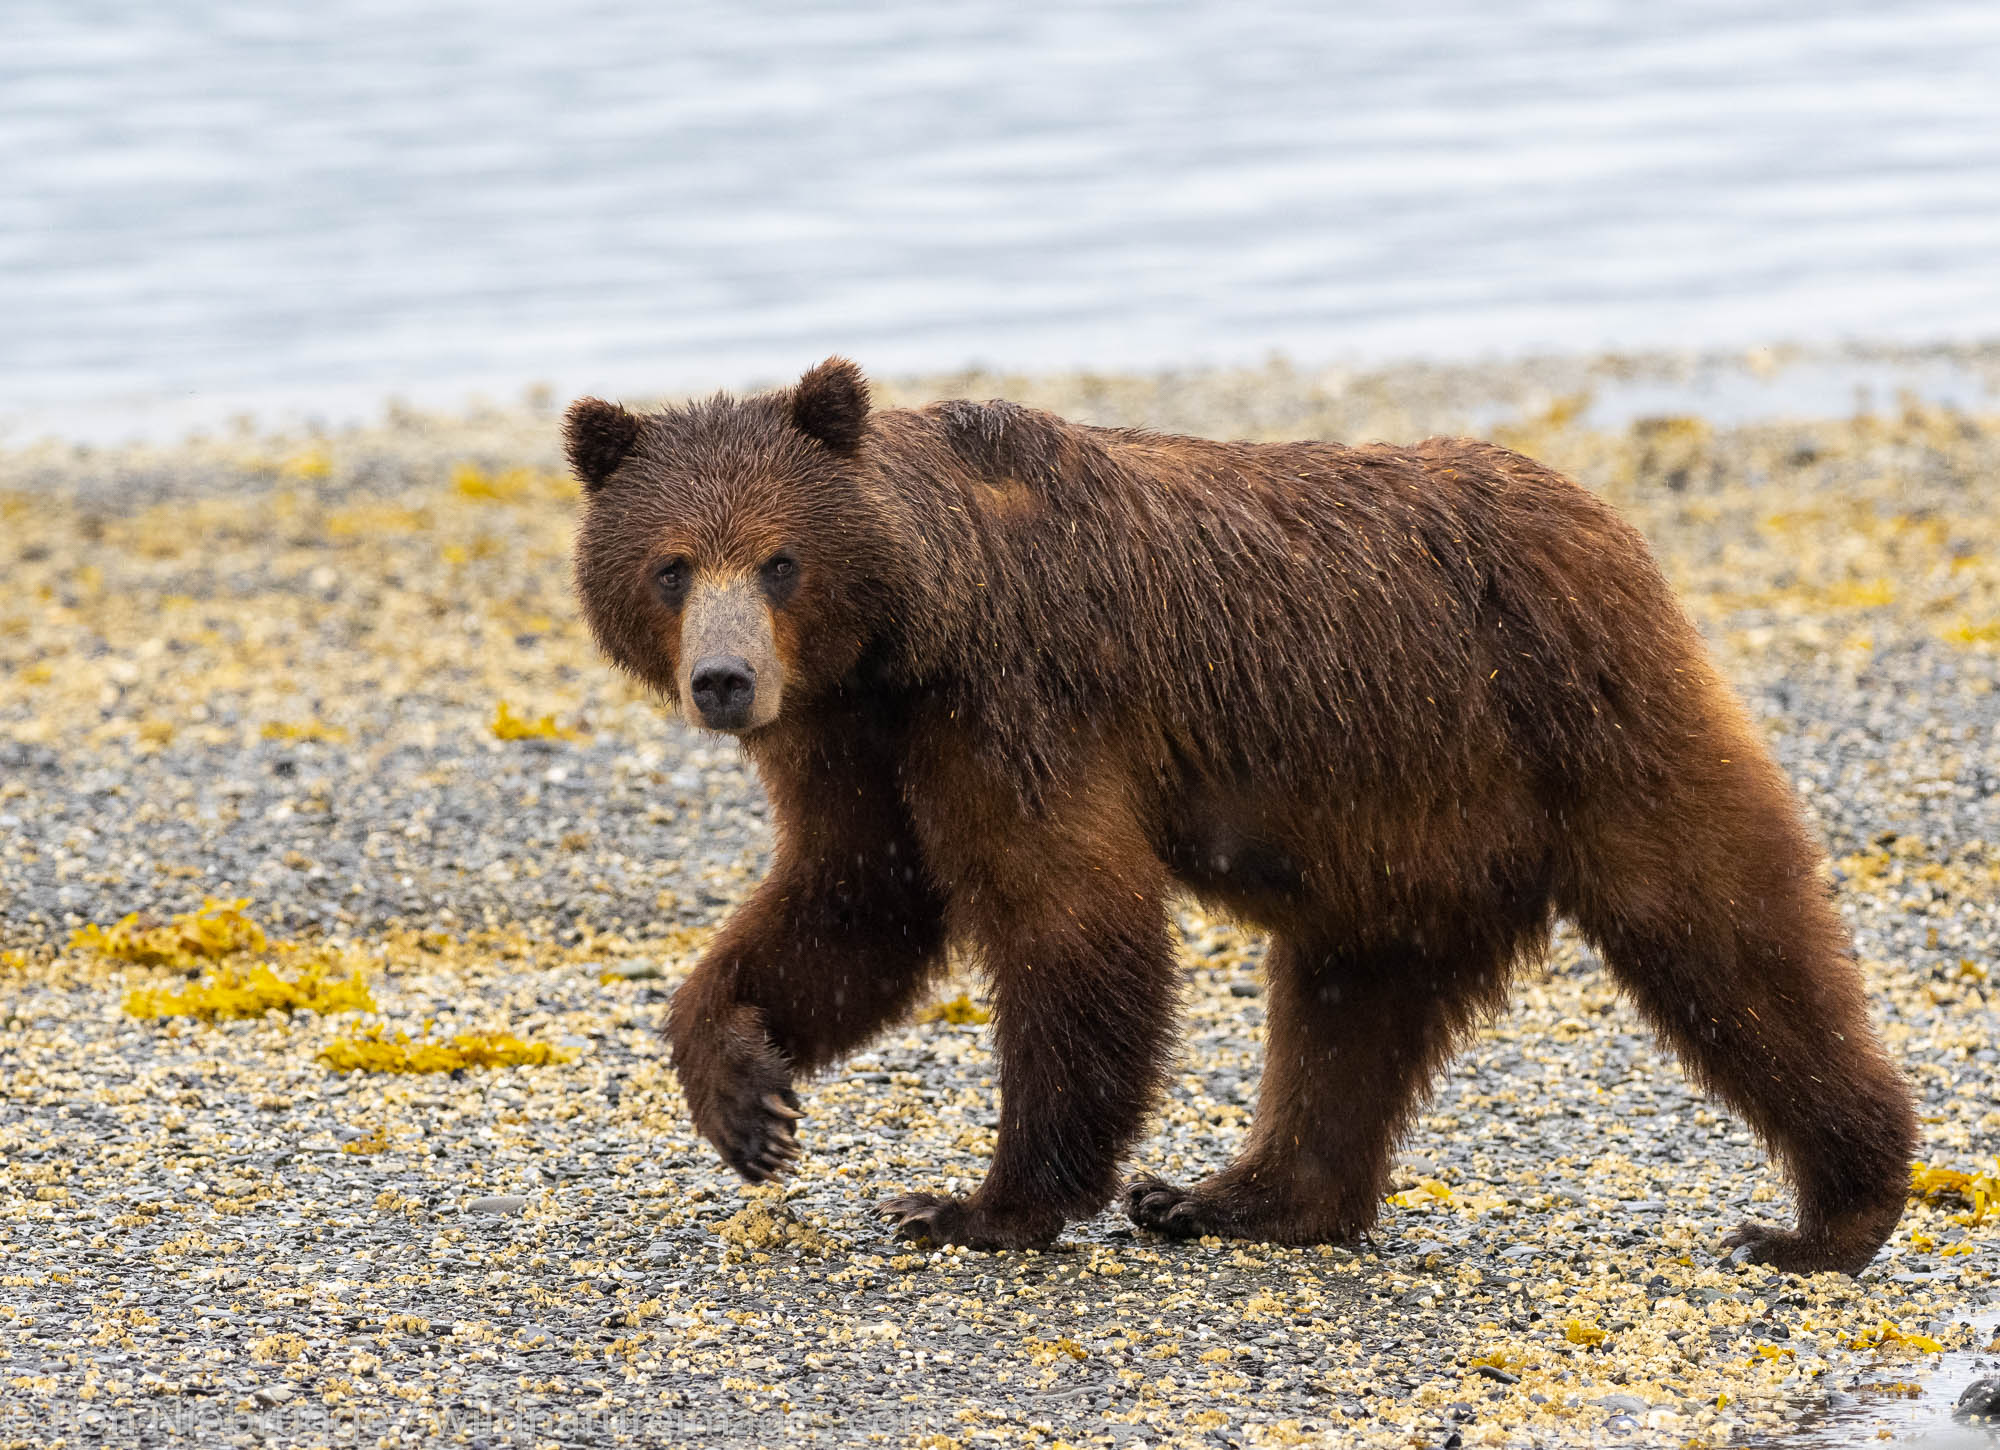 Brown bear sow, Pack Creek Bear Viewing Area on Admiralty Island, Tongass National Forest, Alaska.